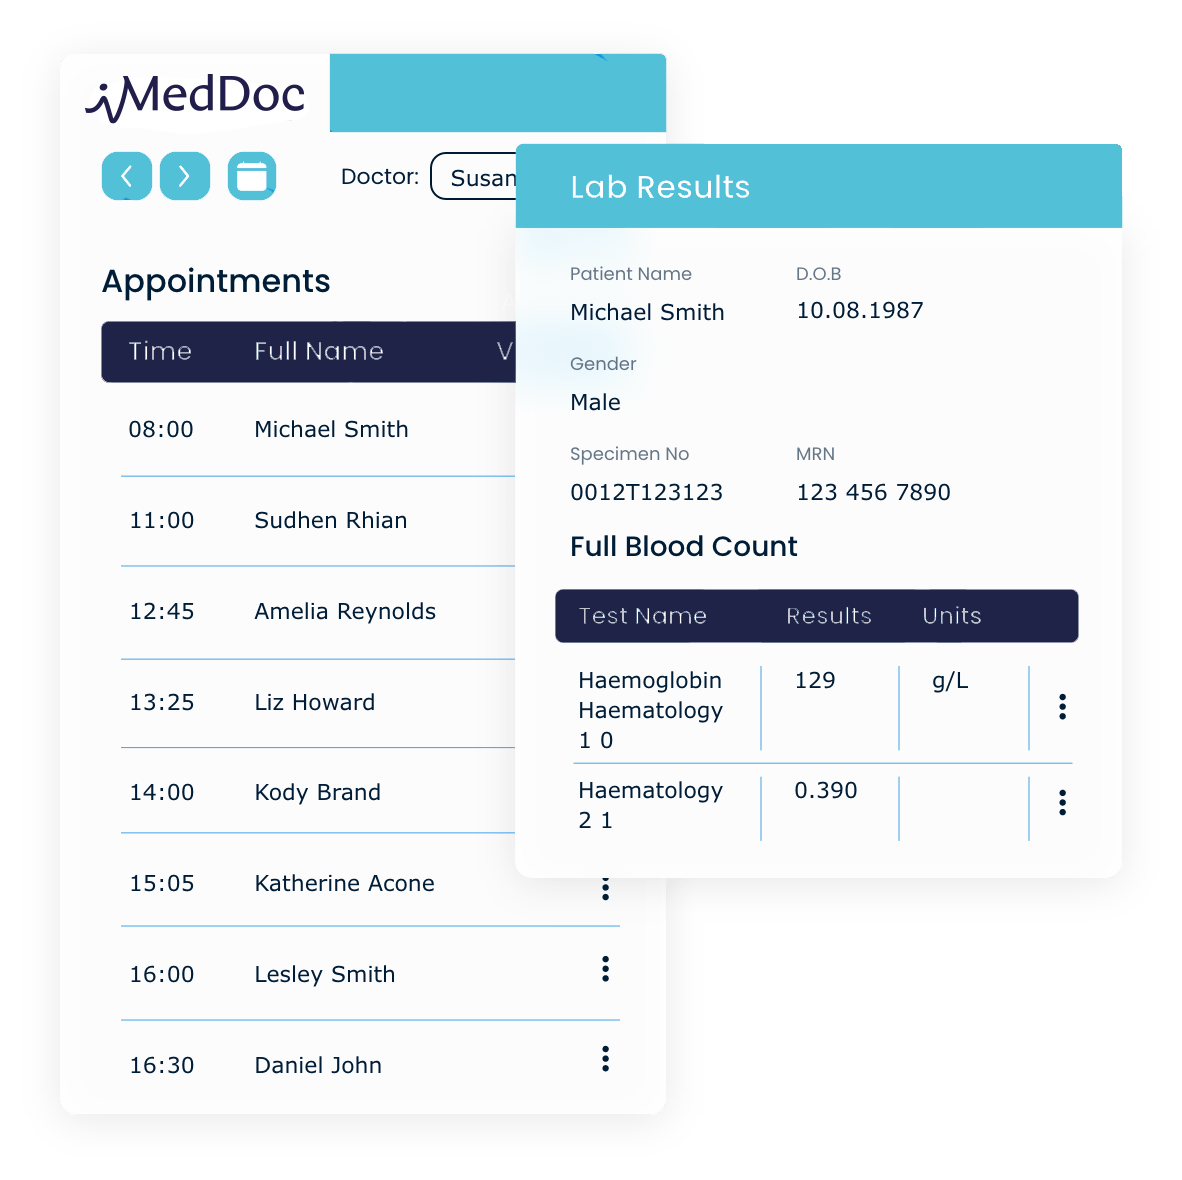 iMedDoc screenshots of lab results and appointment lists